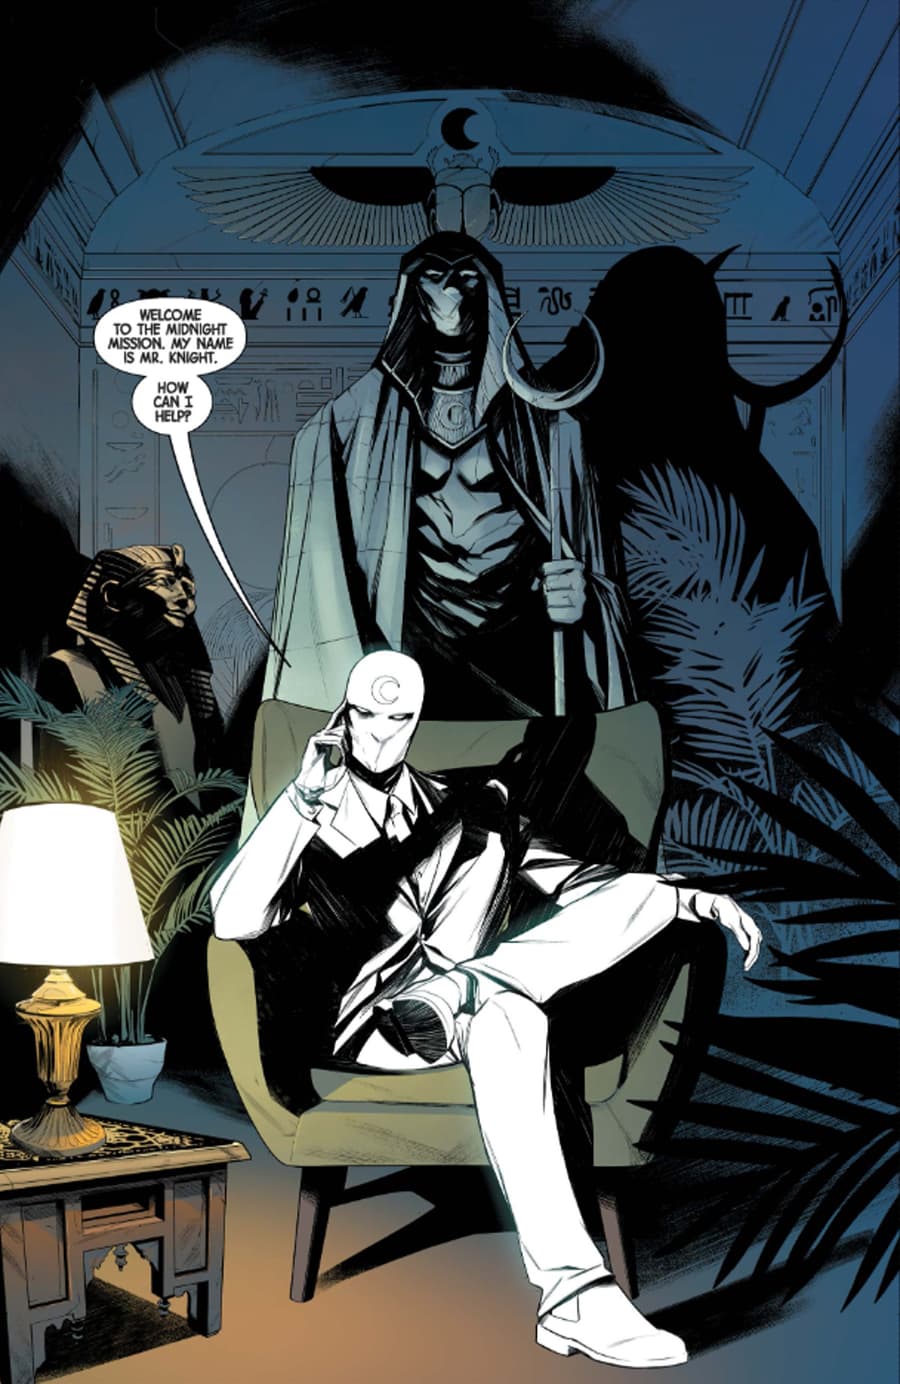 MOON KNIGHT (2021) #1 artwork by Alessandro Cappuccio and Rachelle Rosenberg